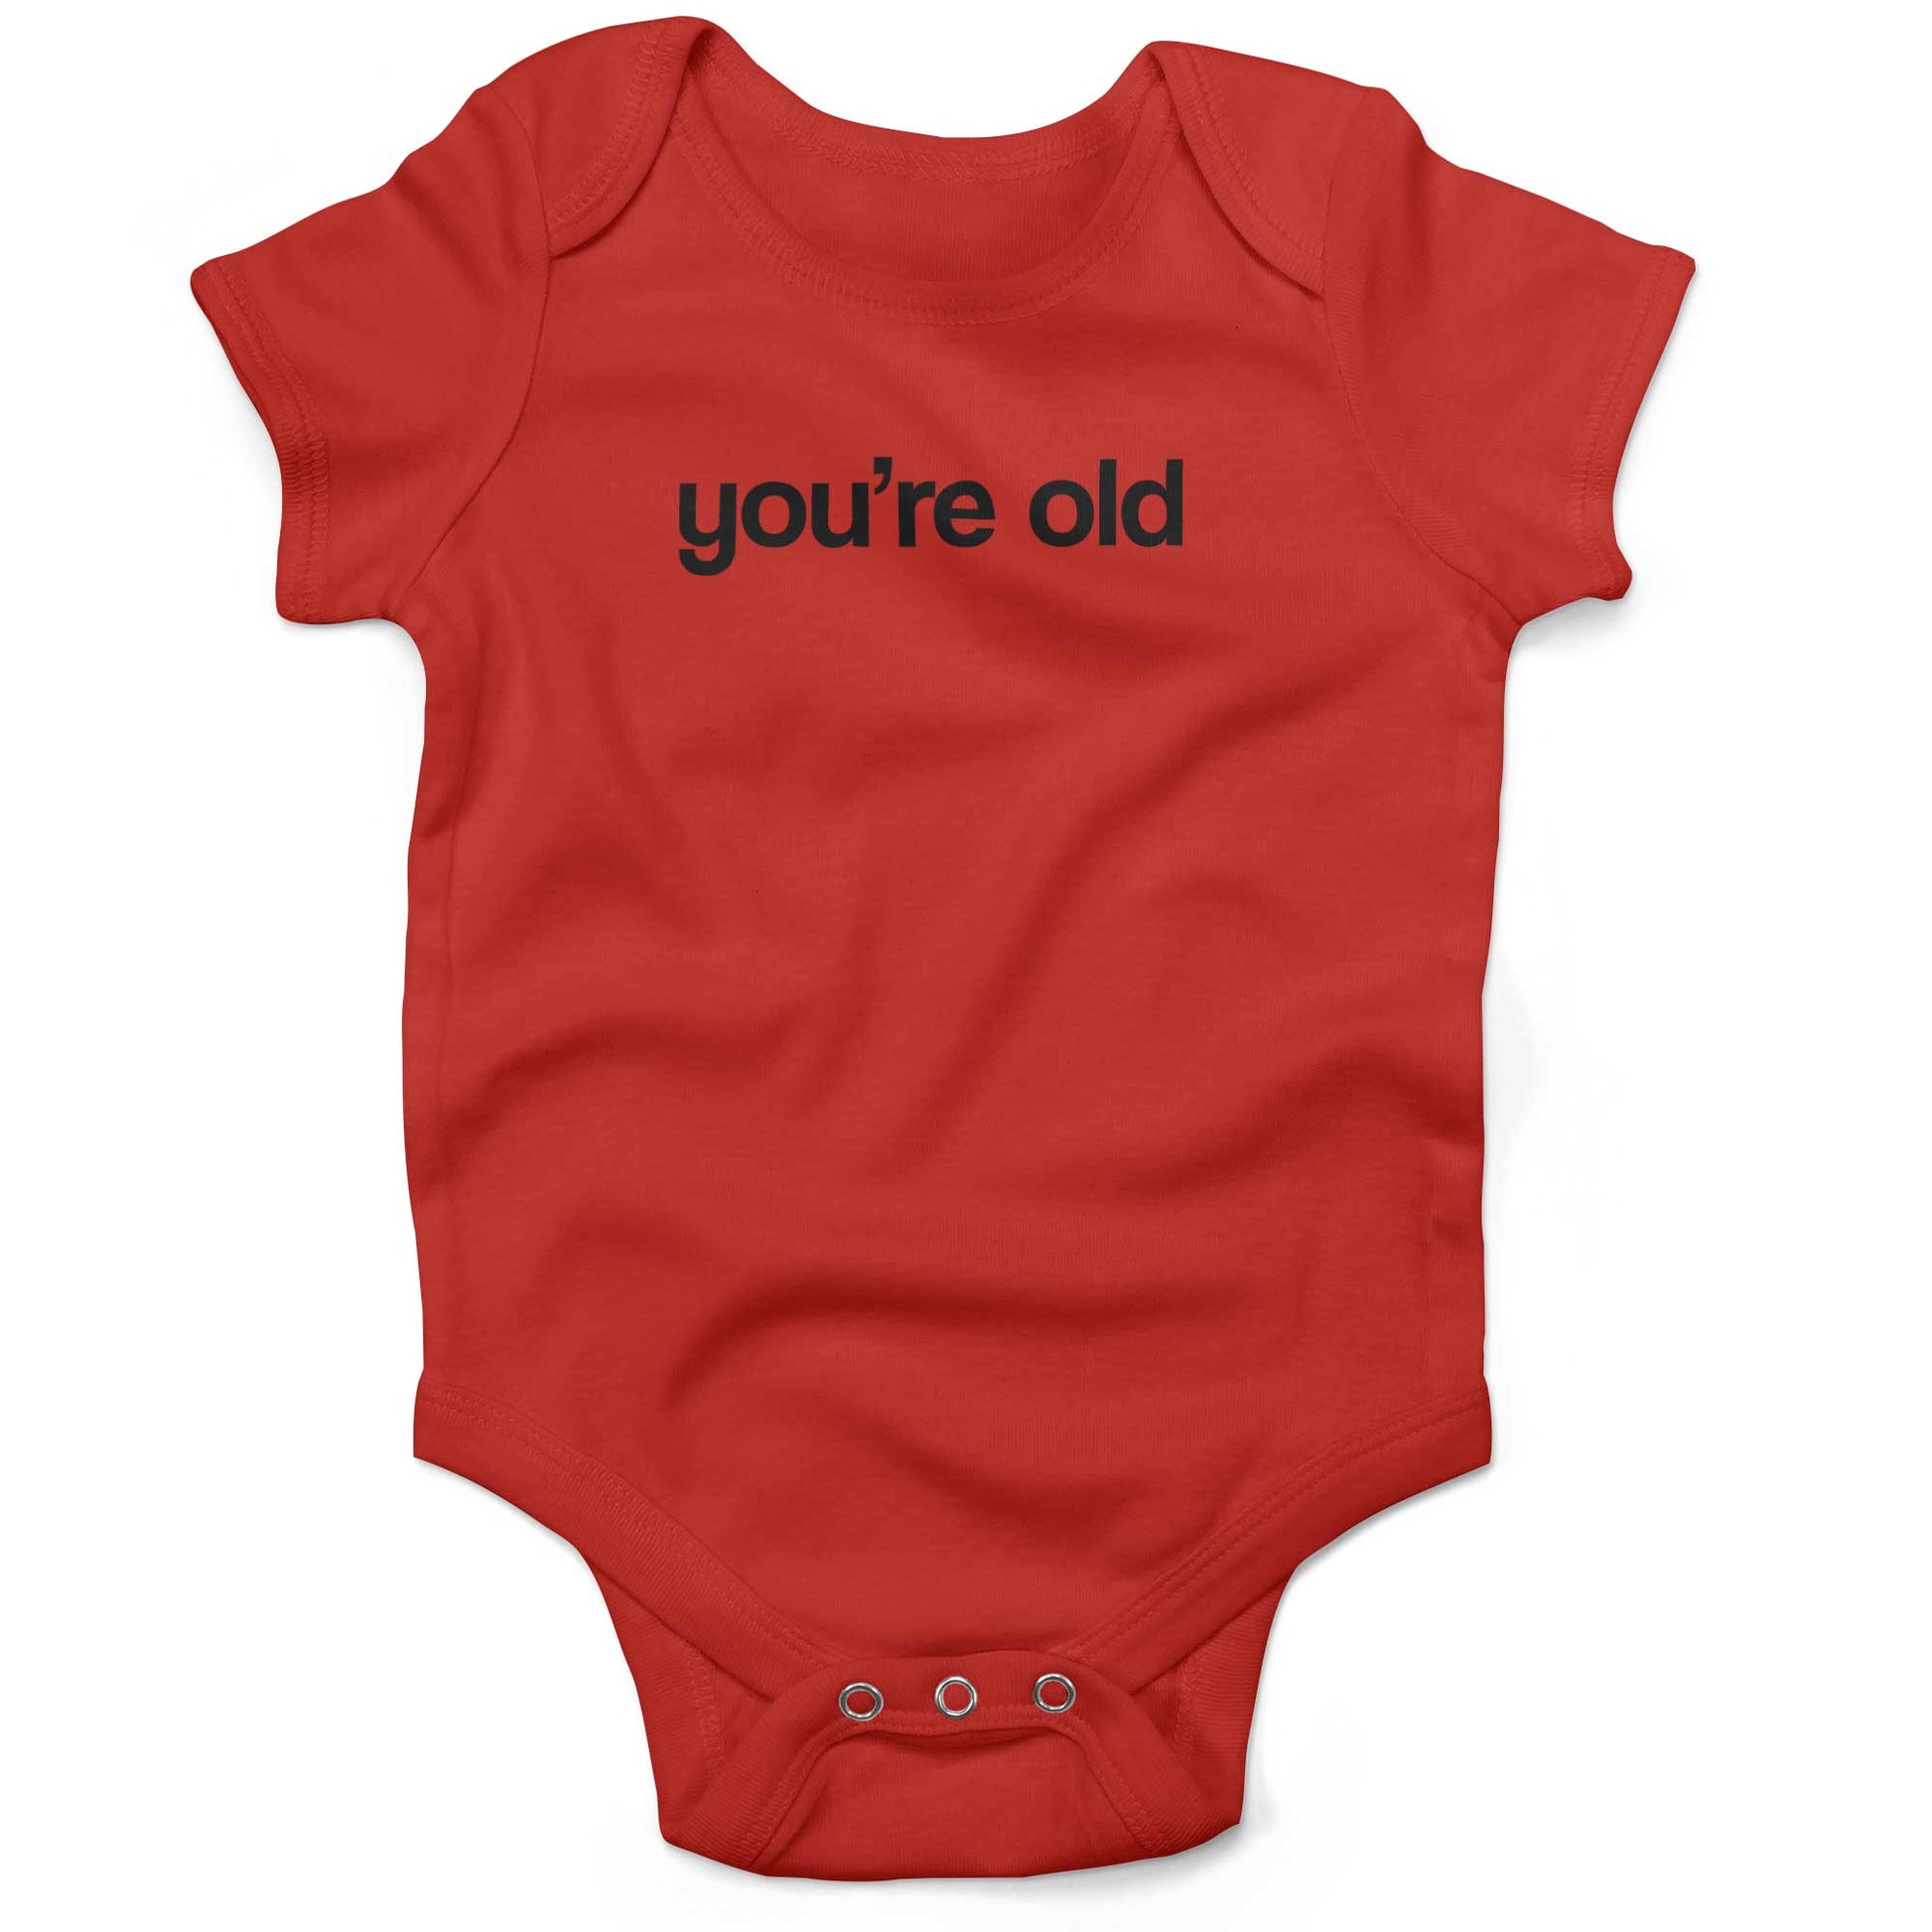 You're Old Infant Bodysuit or Raglan Tee-Organic Red-3-6 months